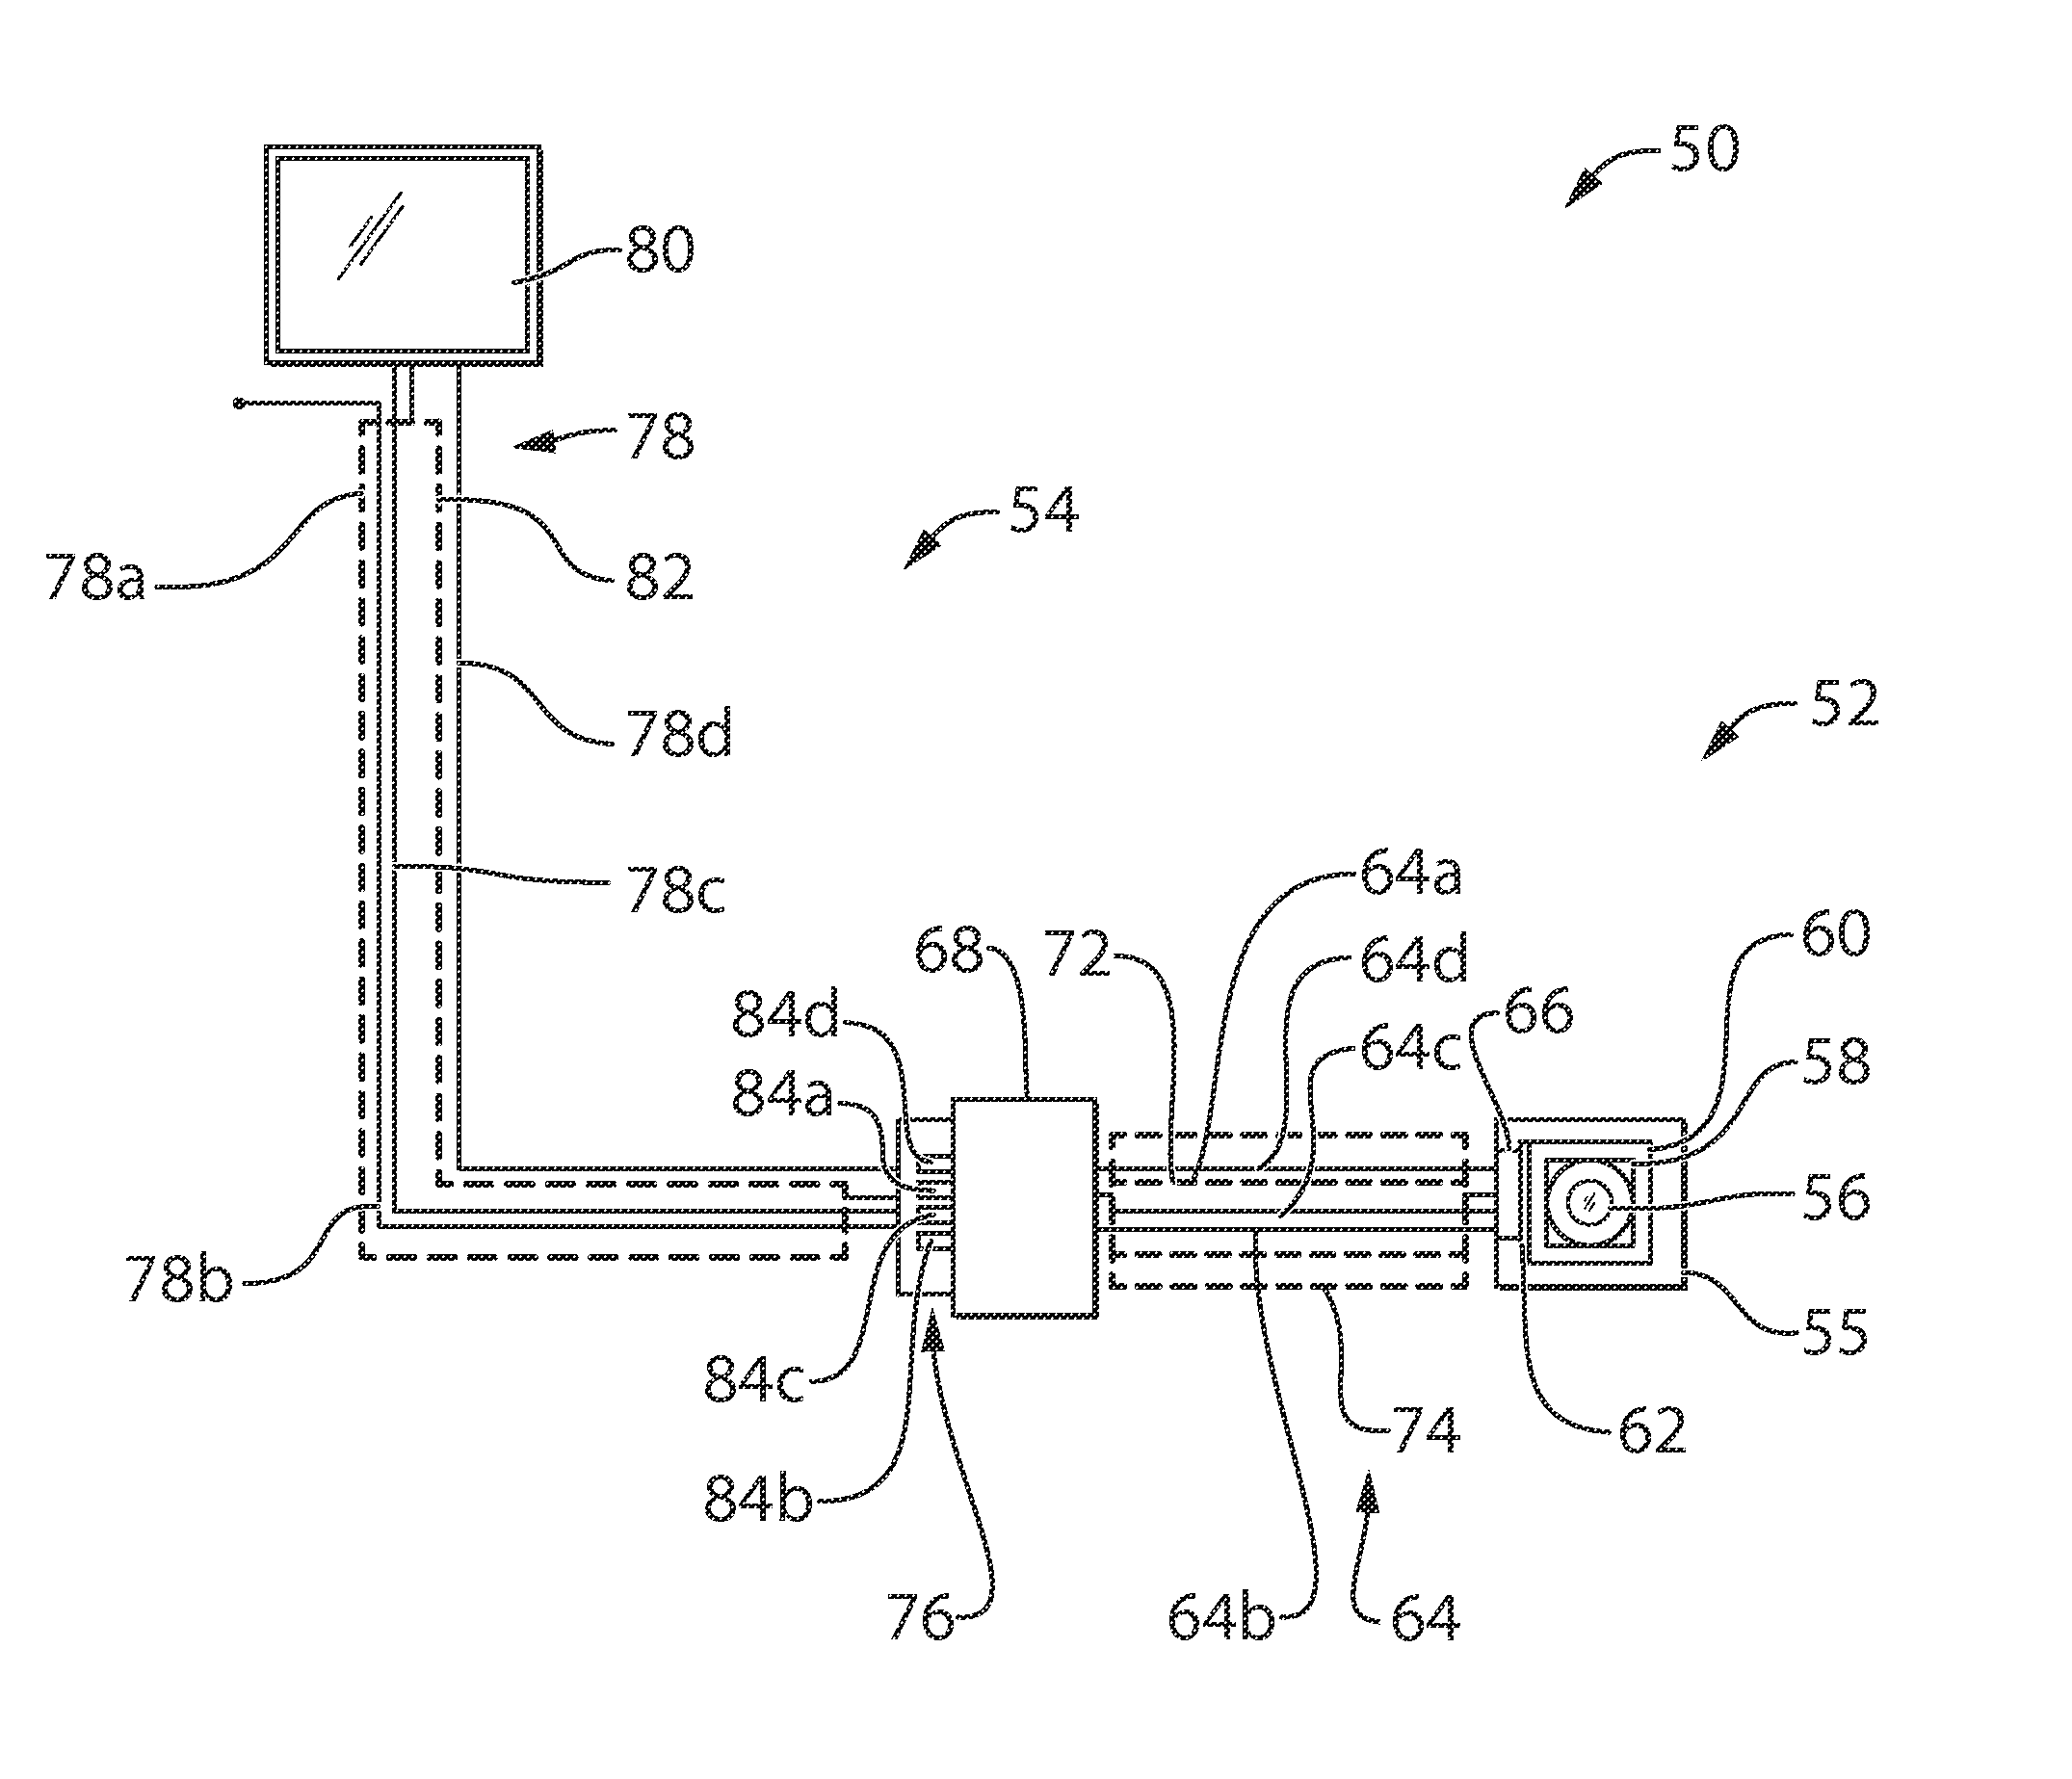 Vehicular camera system with reduced number of pins and conduits